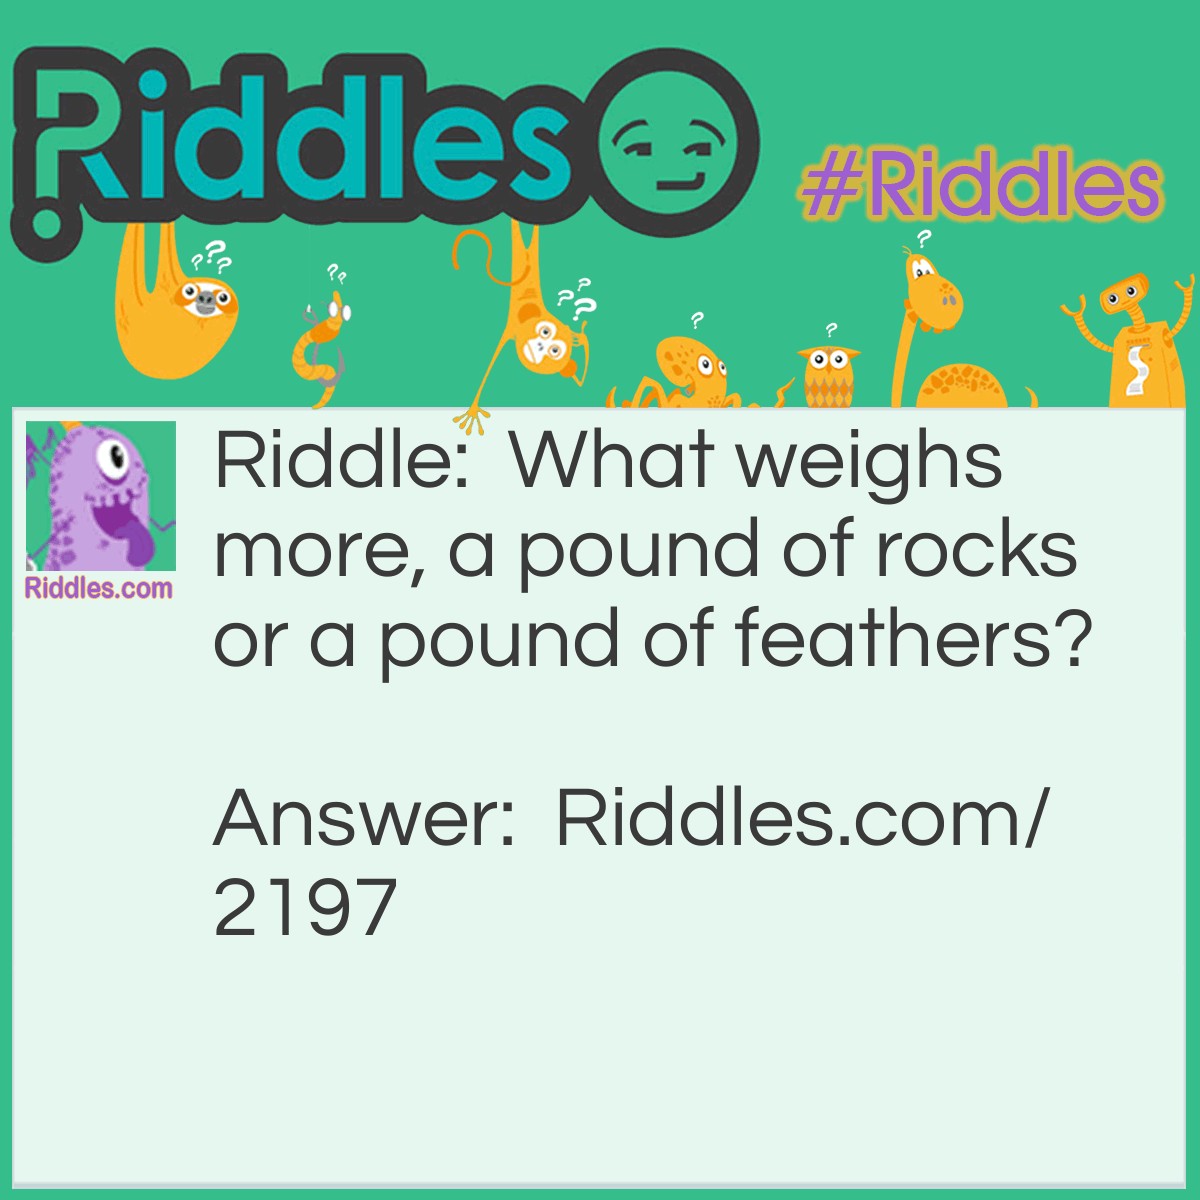 Riddle: What weighs more, a pound of rocks or a pound of feathers? Answer: They both weigh the same.